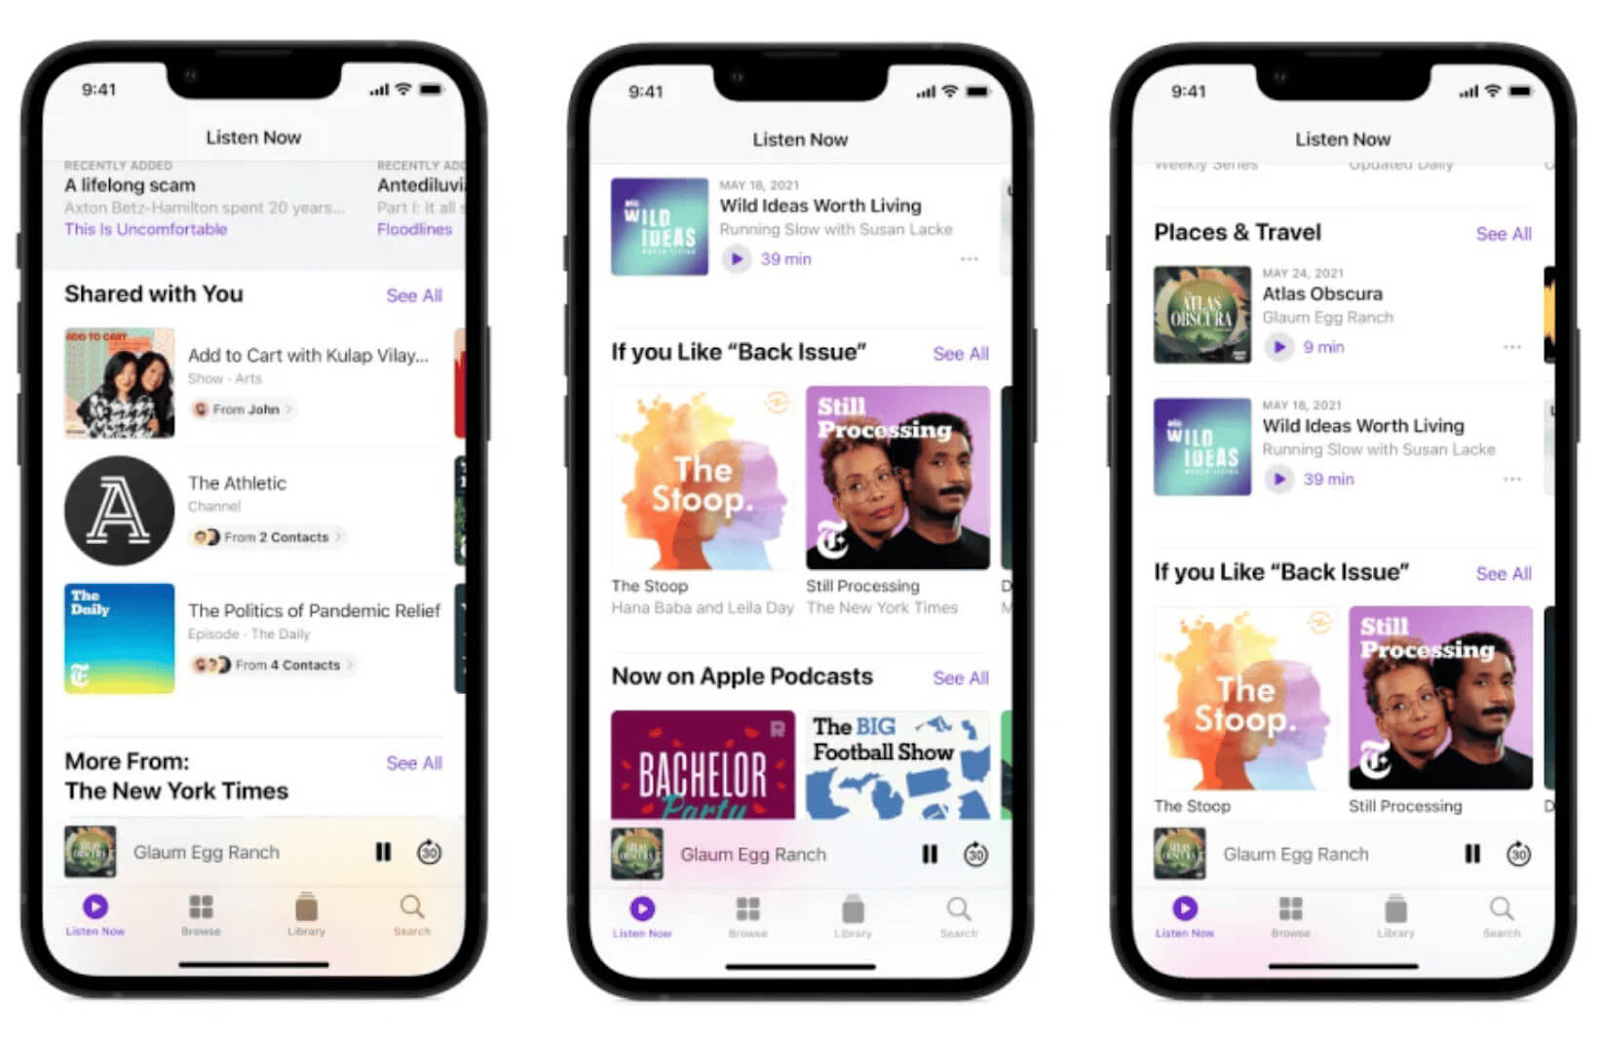 Personalized recommendations sections in Podcasts' Listen Now page